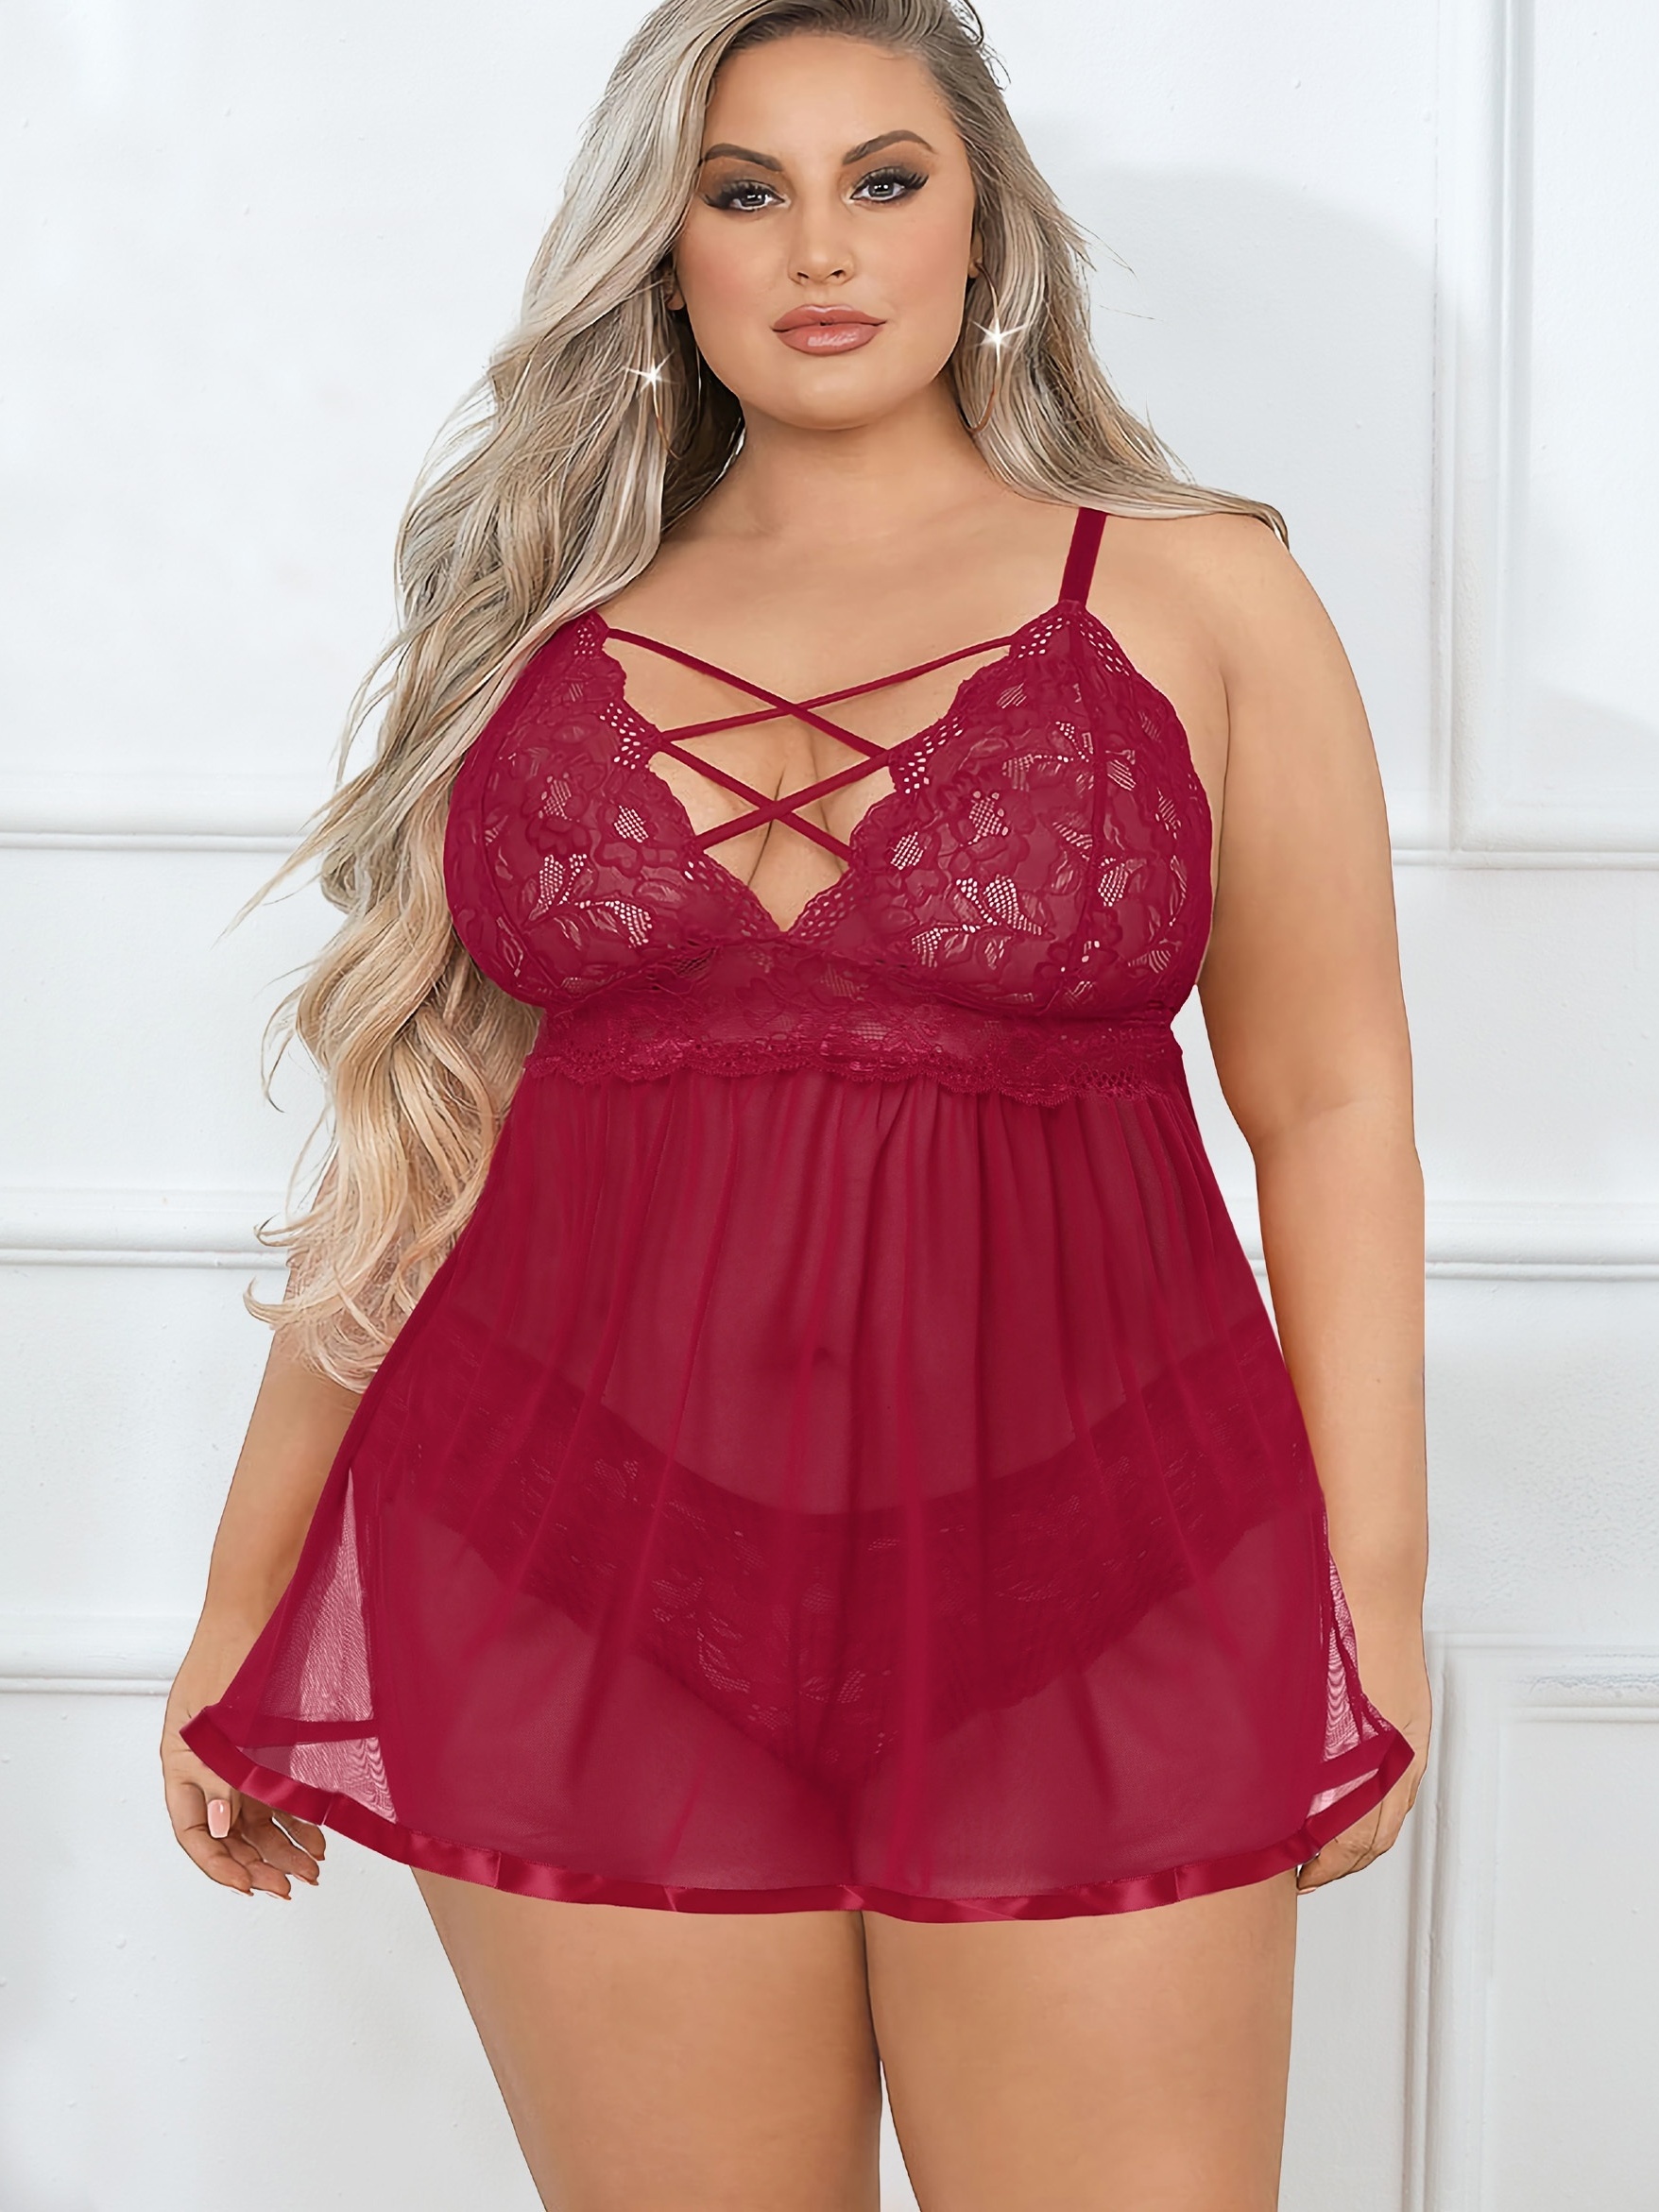 Plus Size Womens Sexy Lingerie Underwear Bra Thong Babydoll Lace